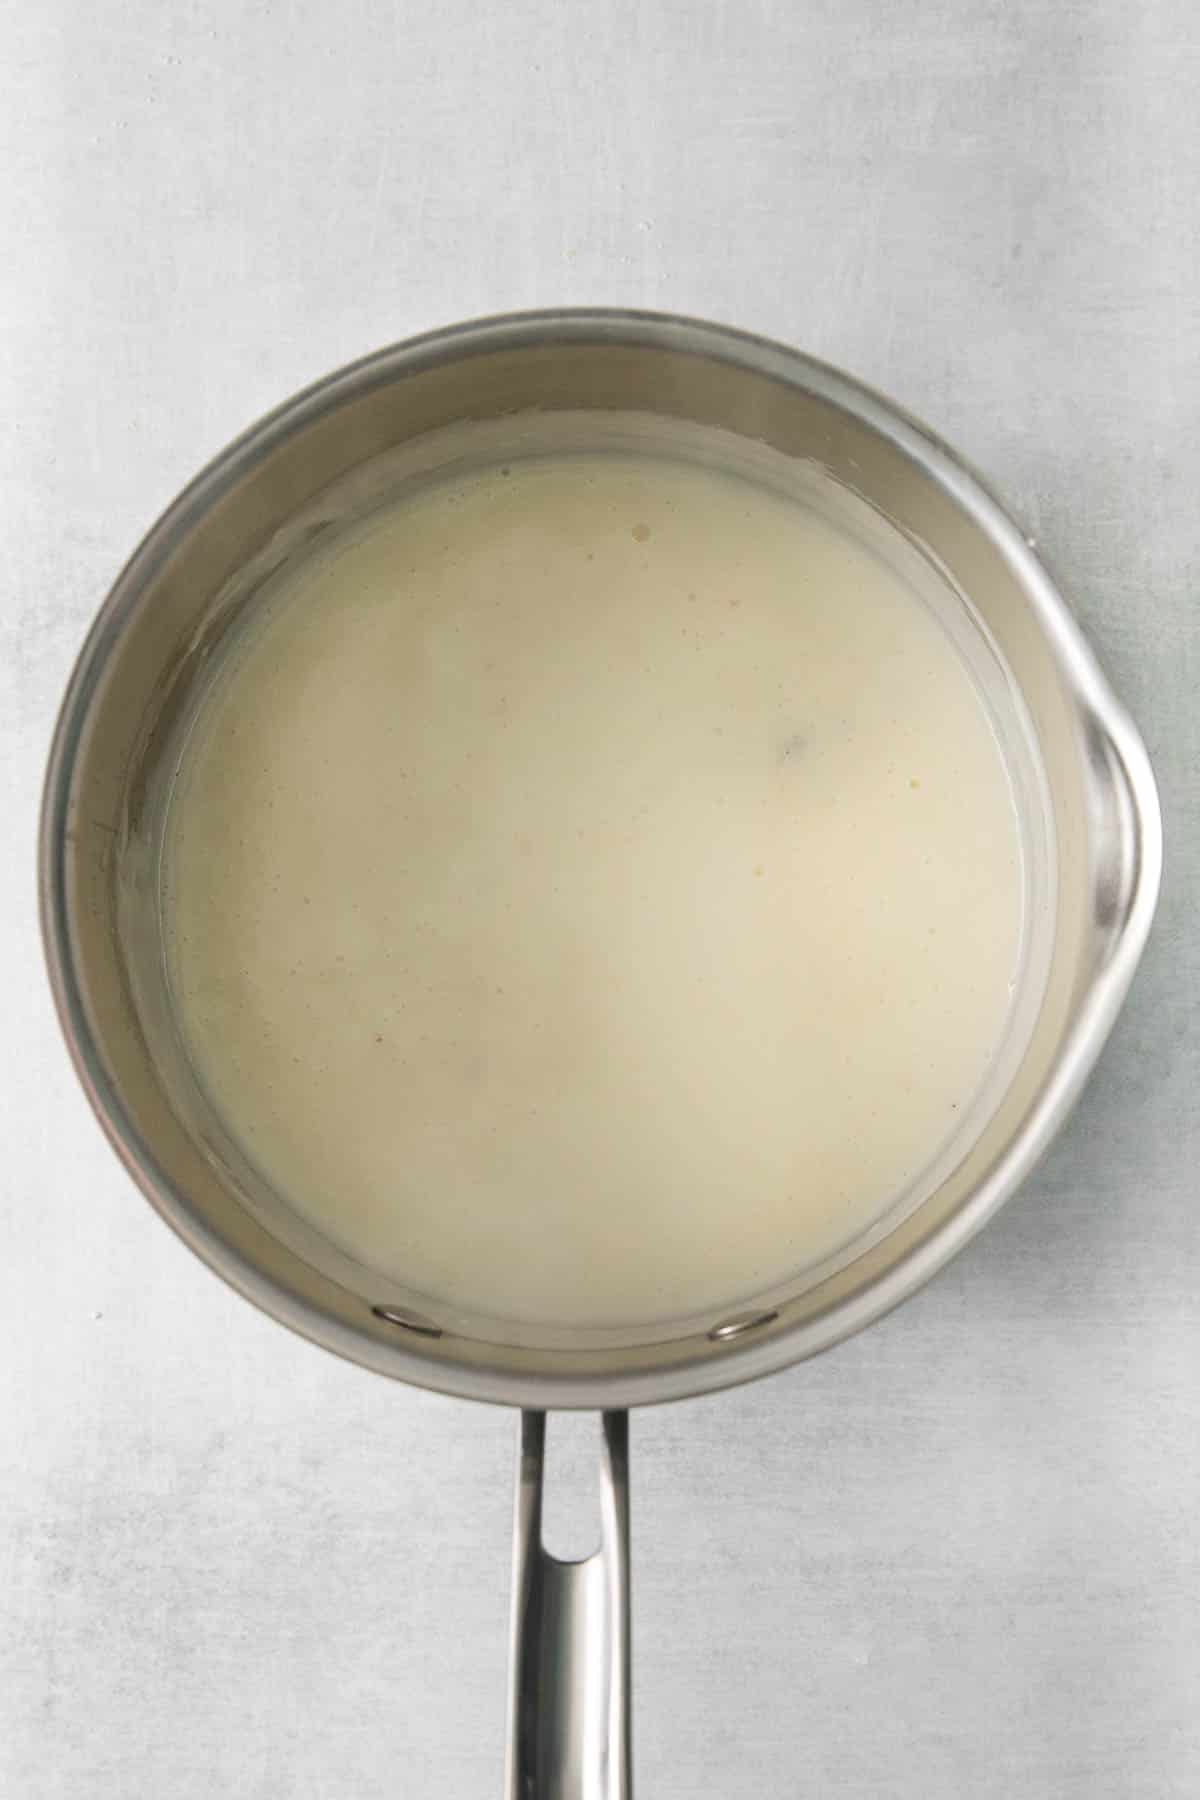 stainless steel pan with cheese sauce.